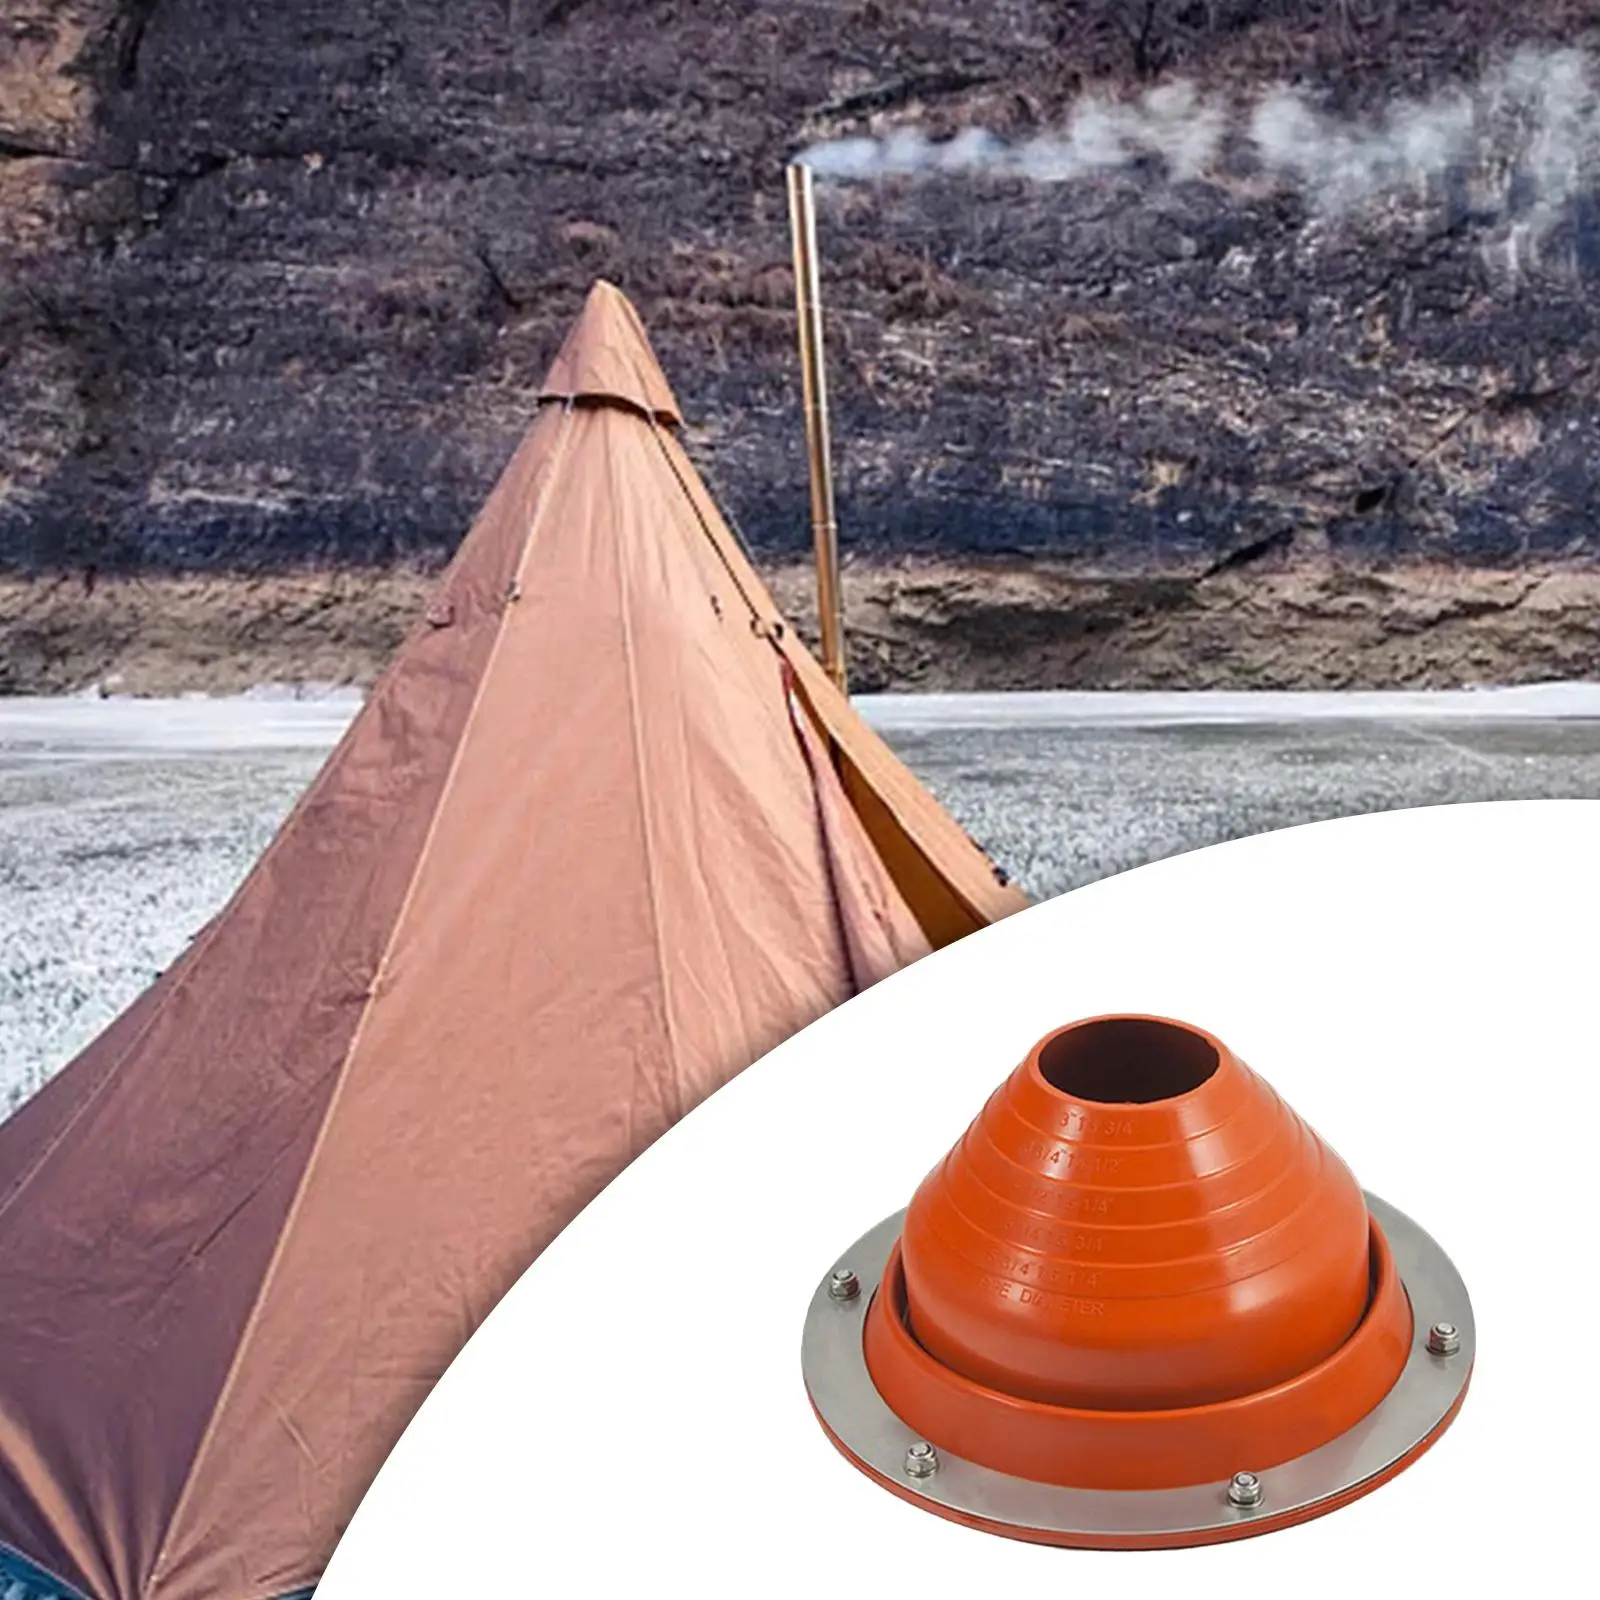 Heat Resistant Silicone Roofing Pipe Flashing Suits 75-160mm Diameter Pipes Roof Jack Pipe Boot Flexible for Outdoor Camping